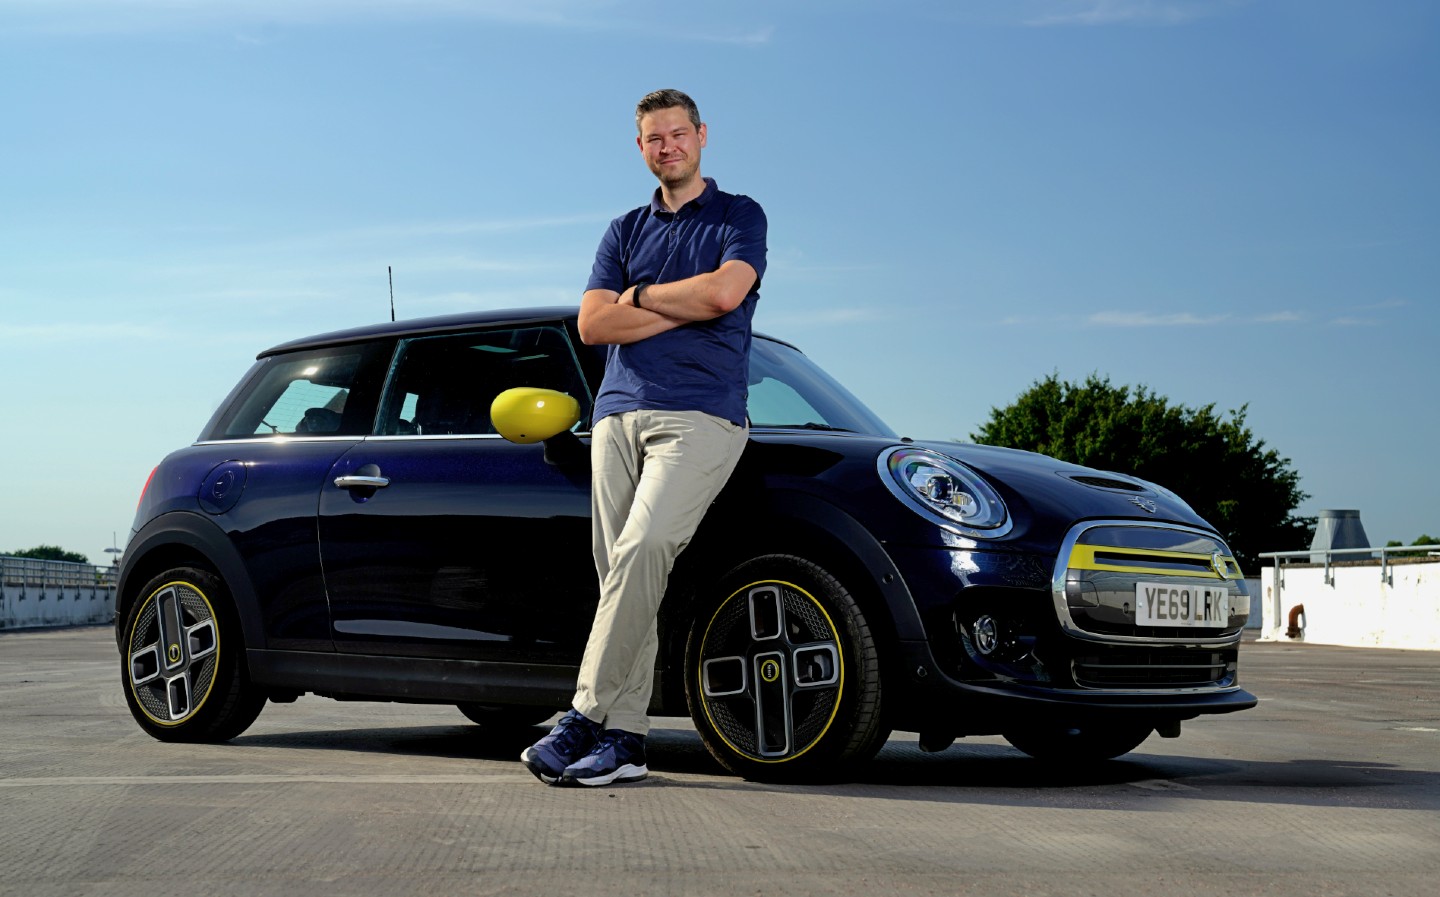 2020 Mini Electric long-term review by Will Dron for Sunday Times Driving.co.uk